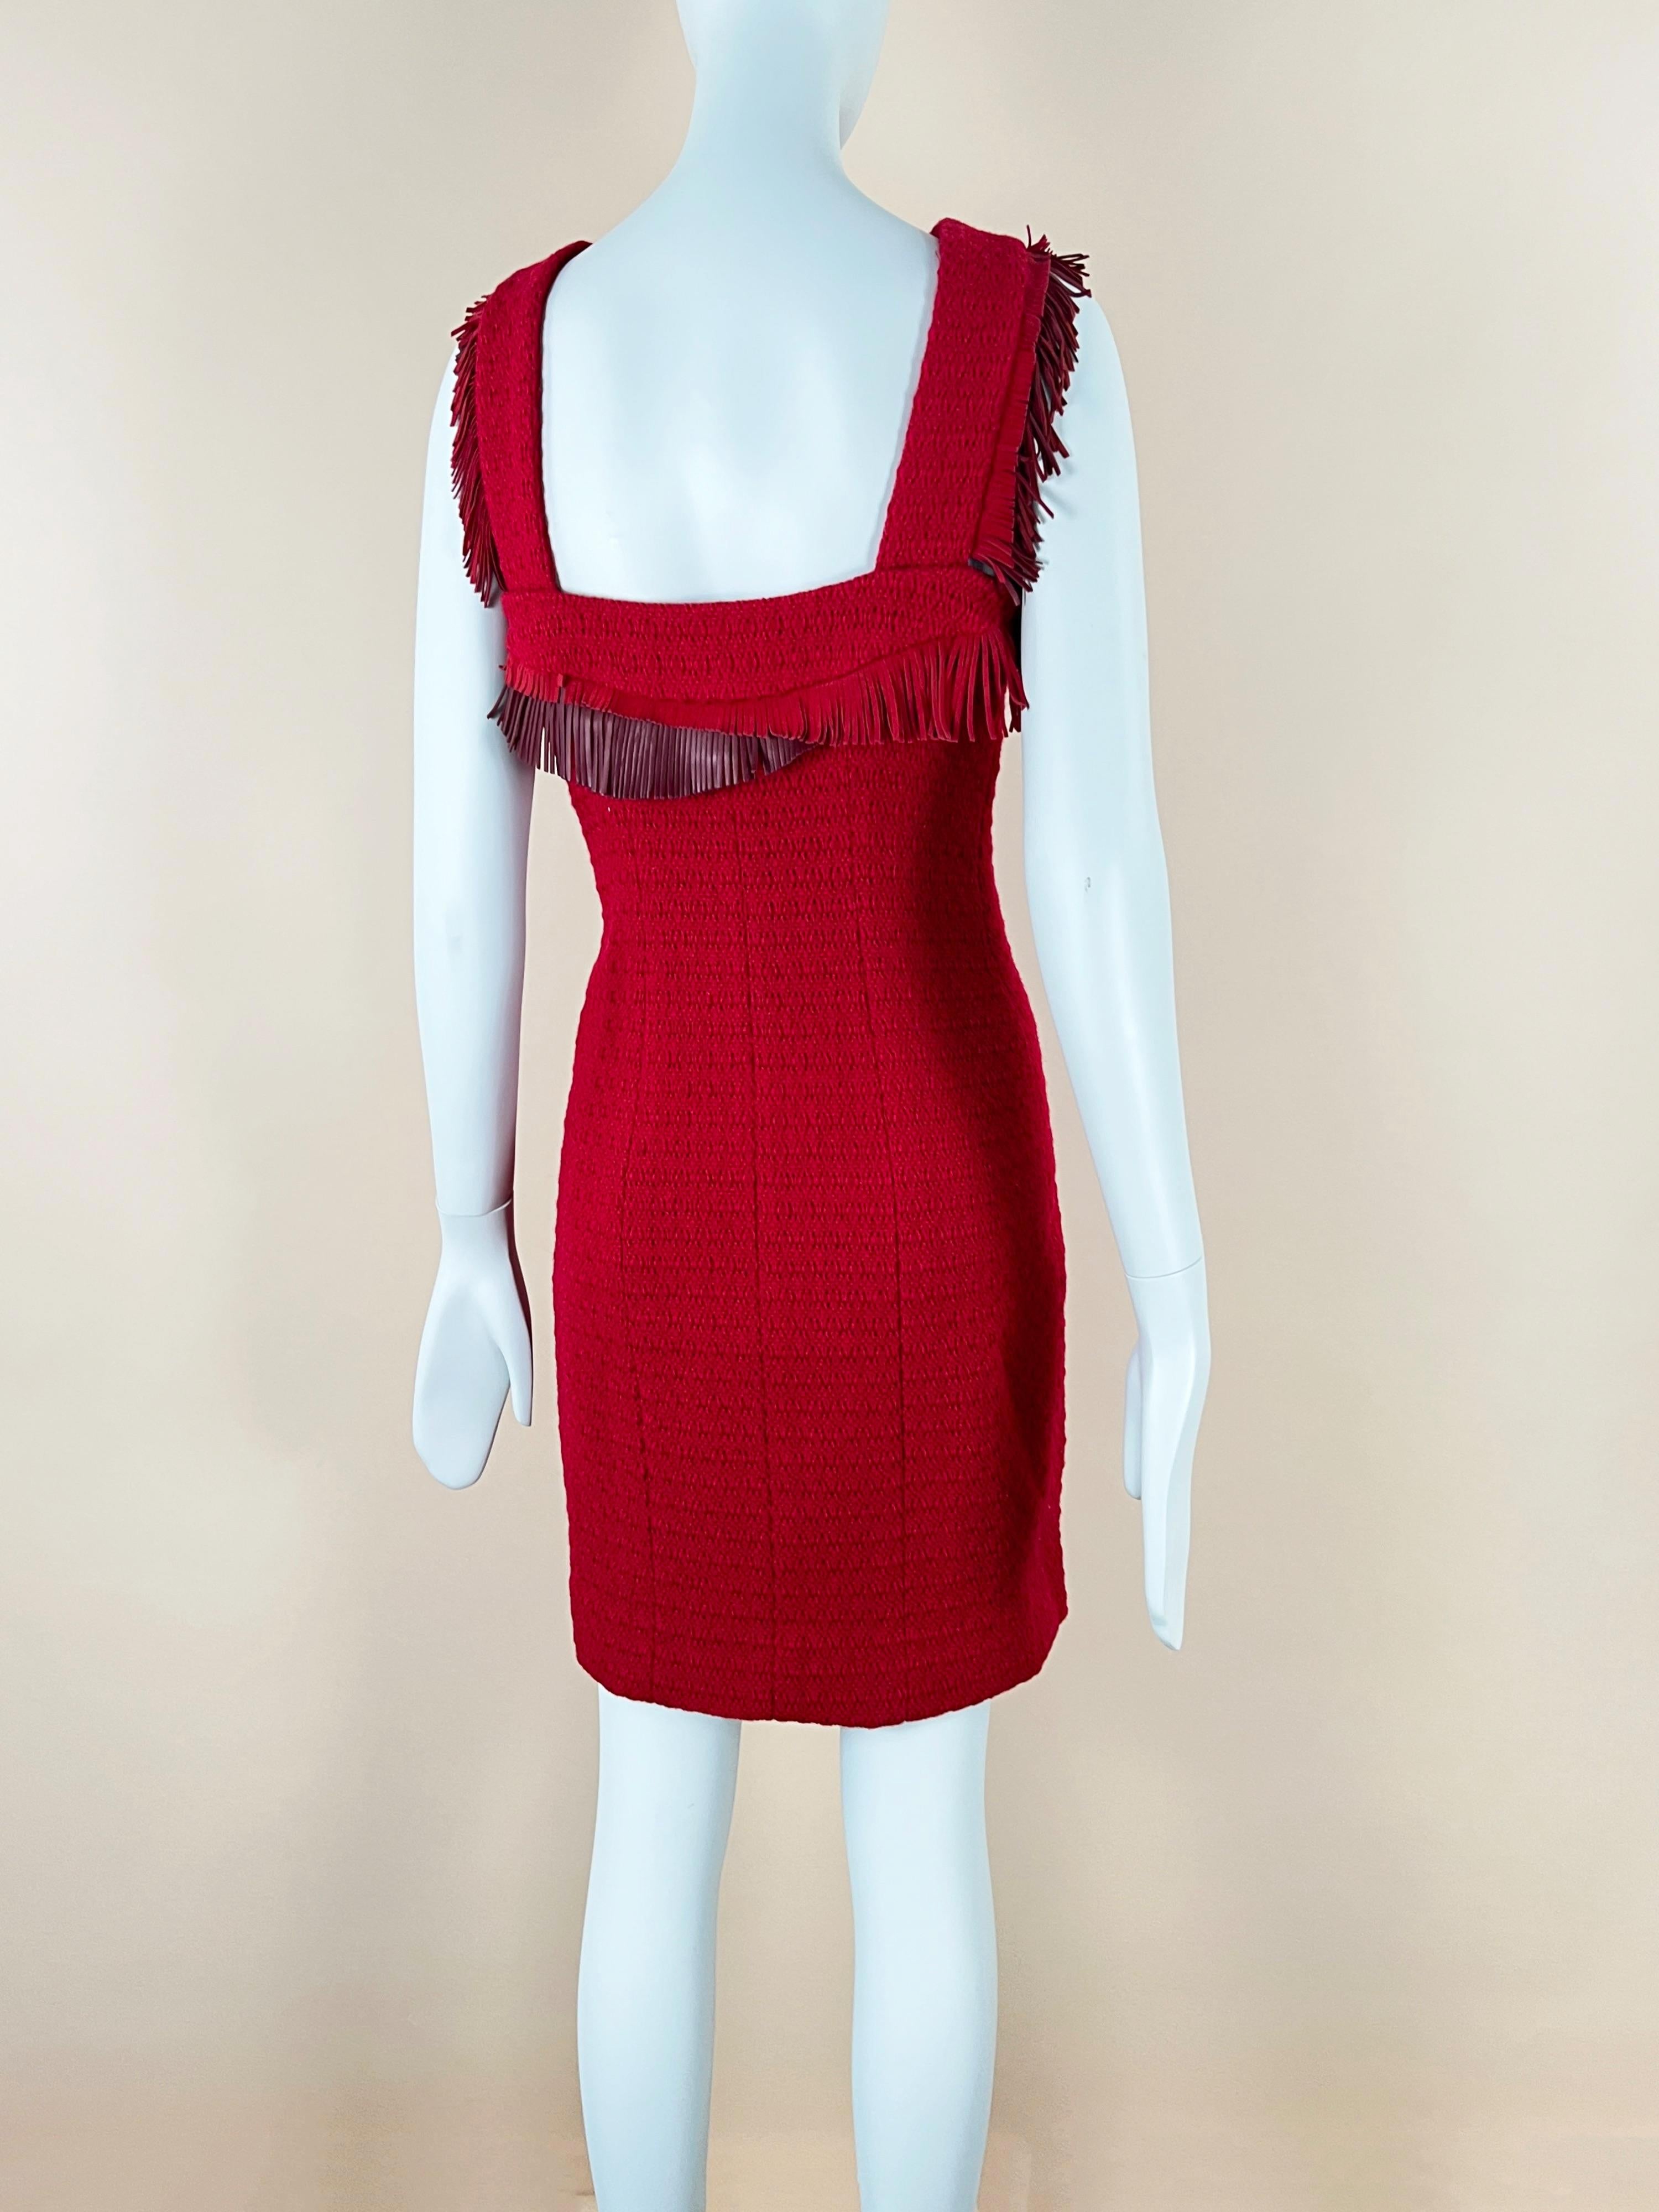 Chanel New Dallas Collection Runway Tweed Dress 8